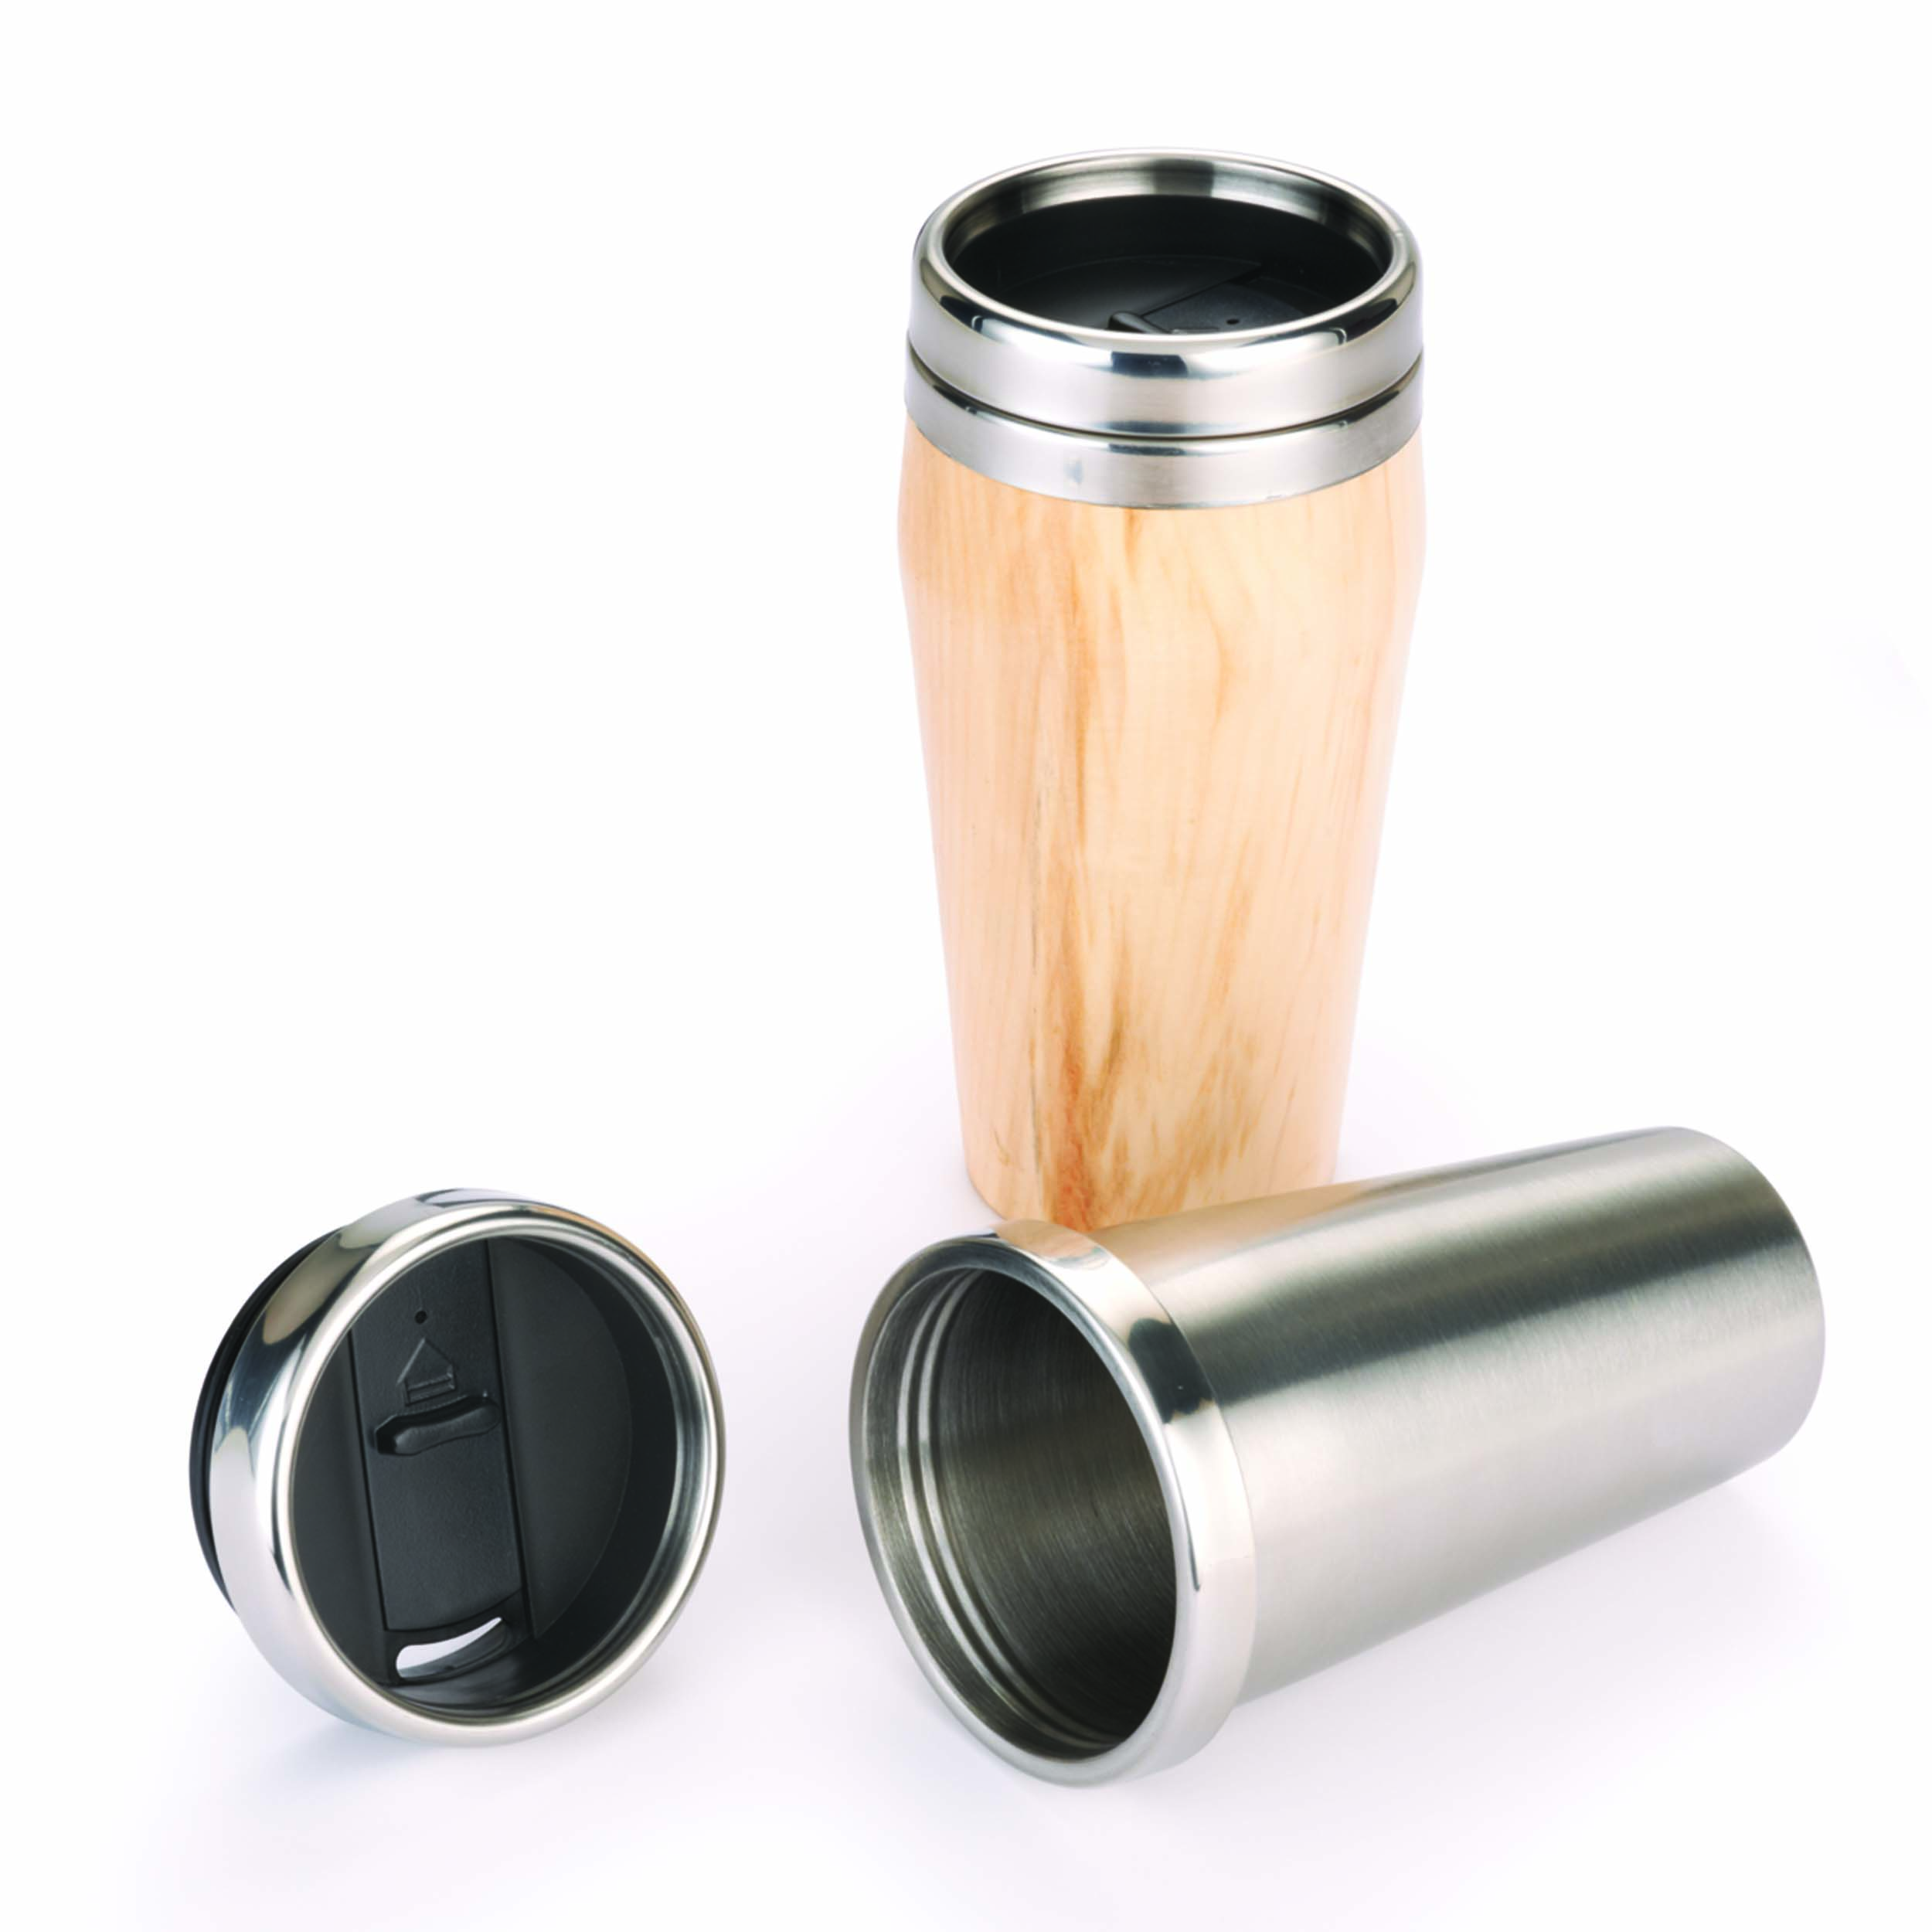 16oz. Stainless Steel Travel Mug Turning Kit With Screw Top Lid